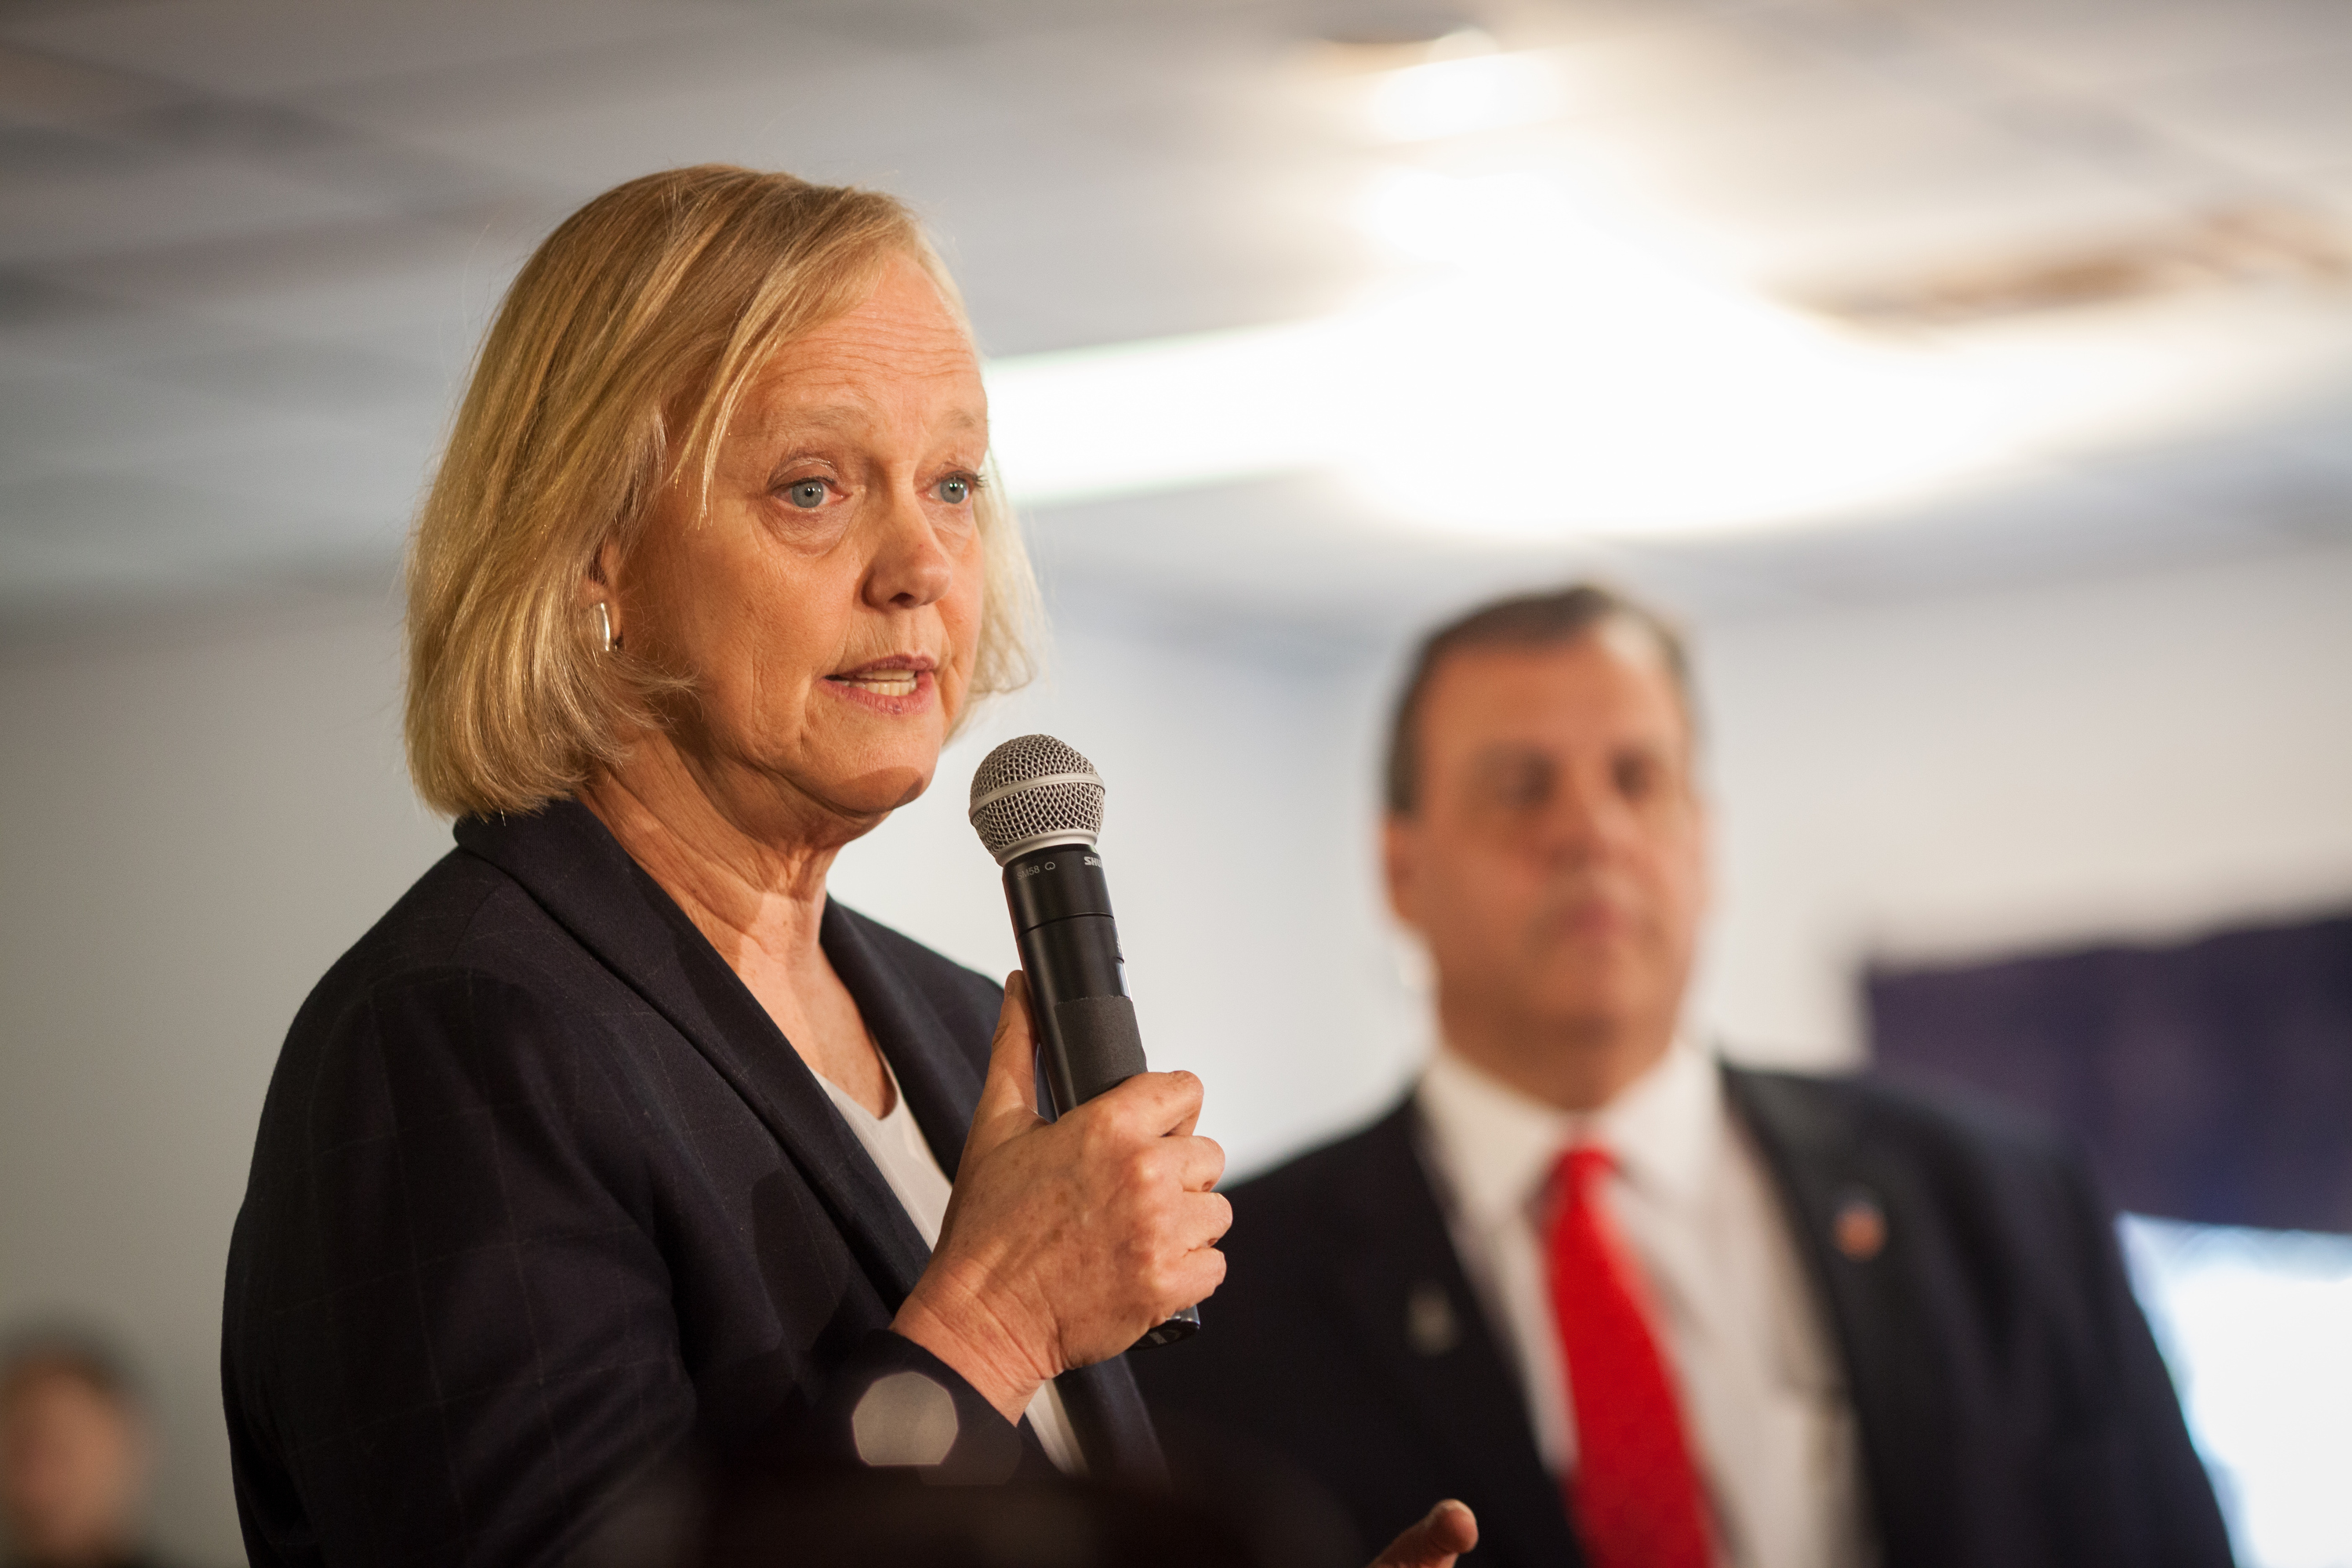 Meg Whitman Joins Chris Christie For Town Hall In New Hampshire